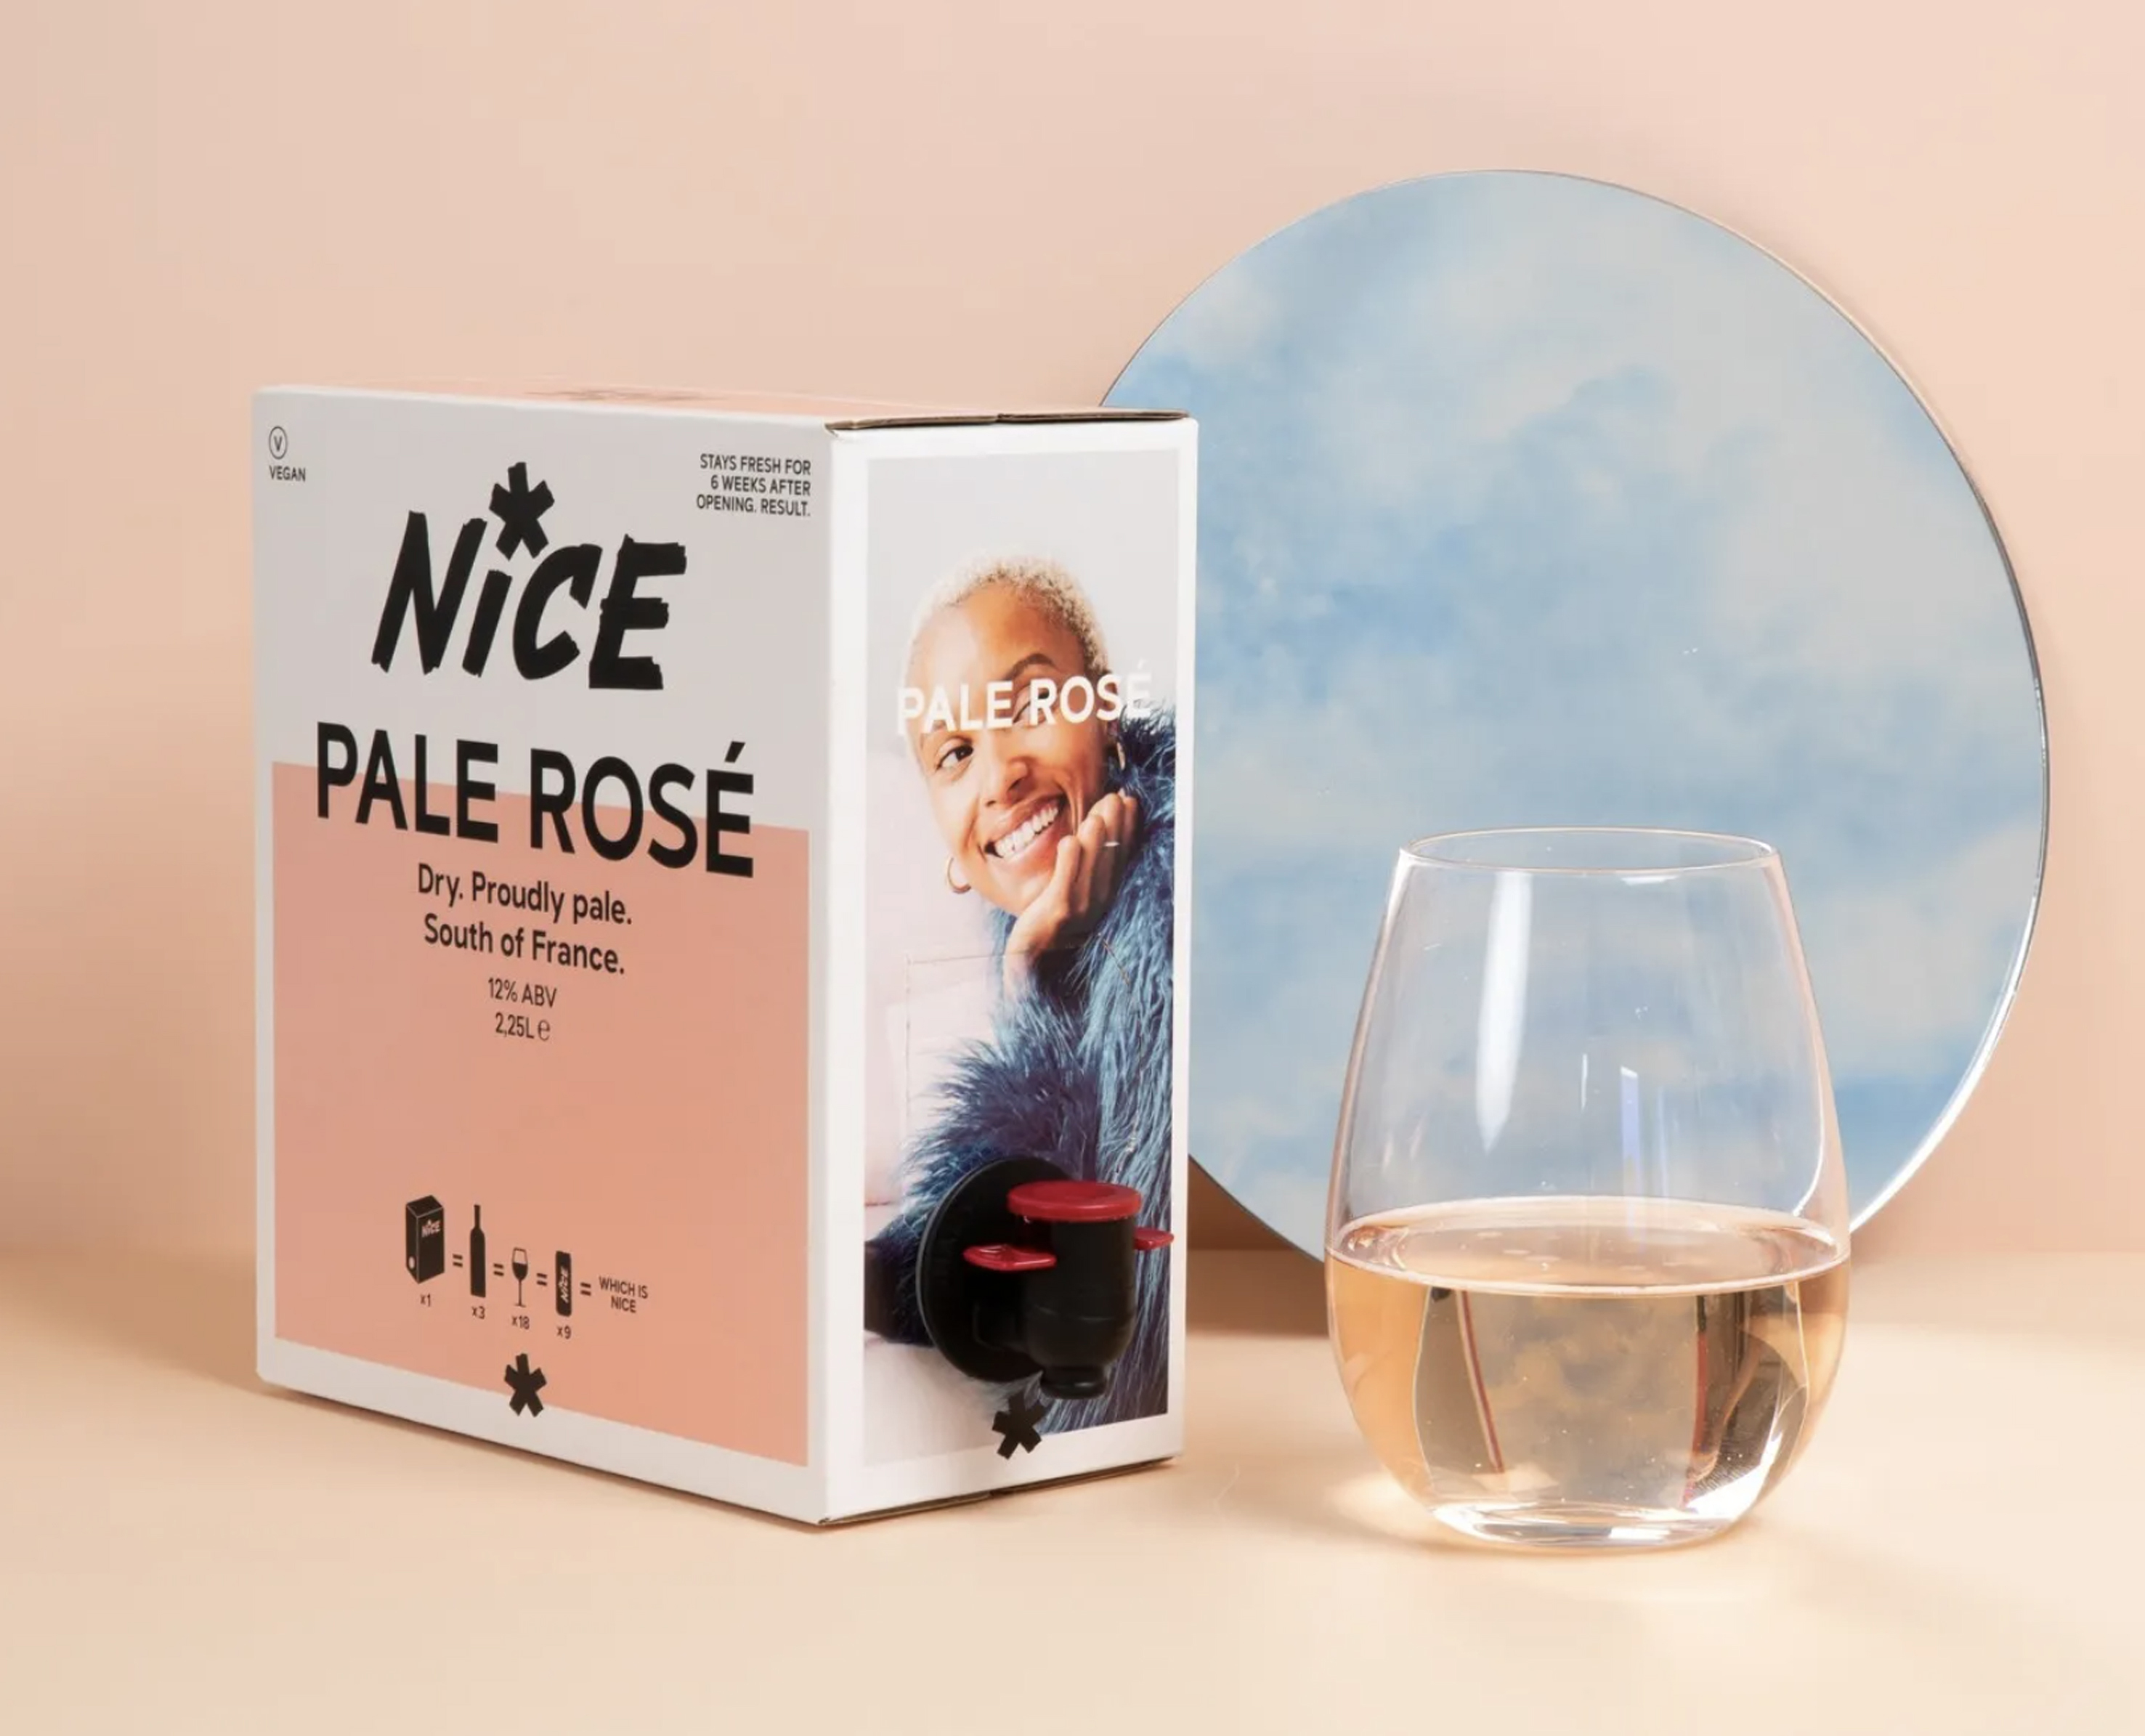 NICE Pale Rose Wine in a Box, South of France, NICE